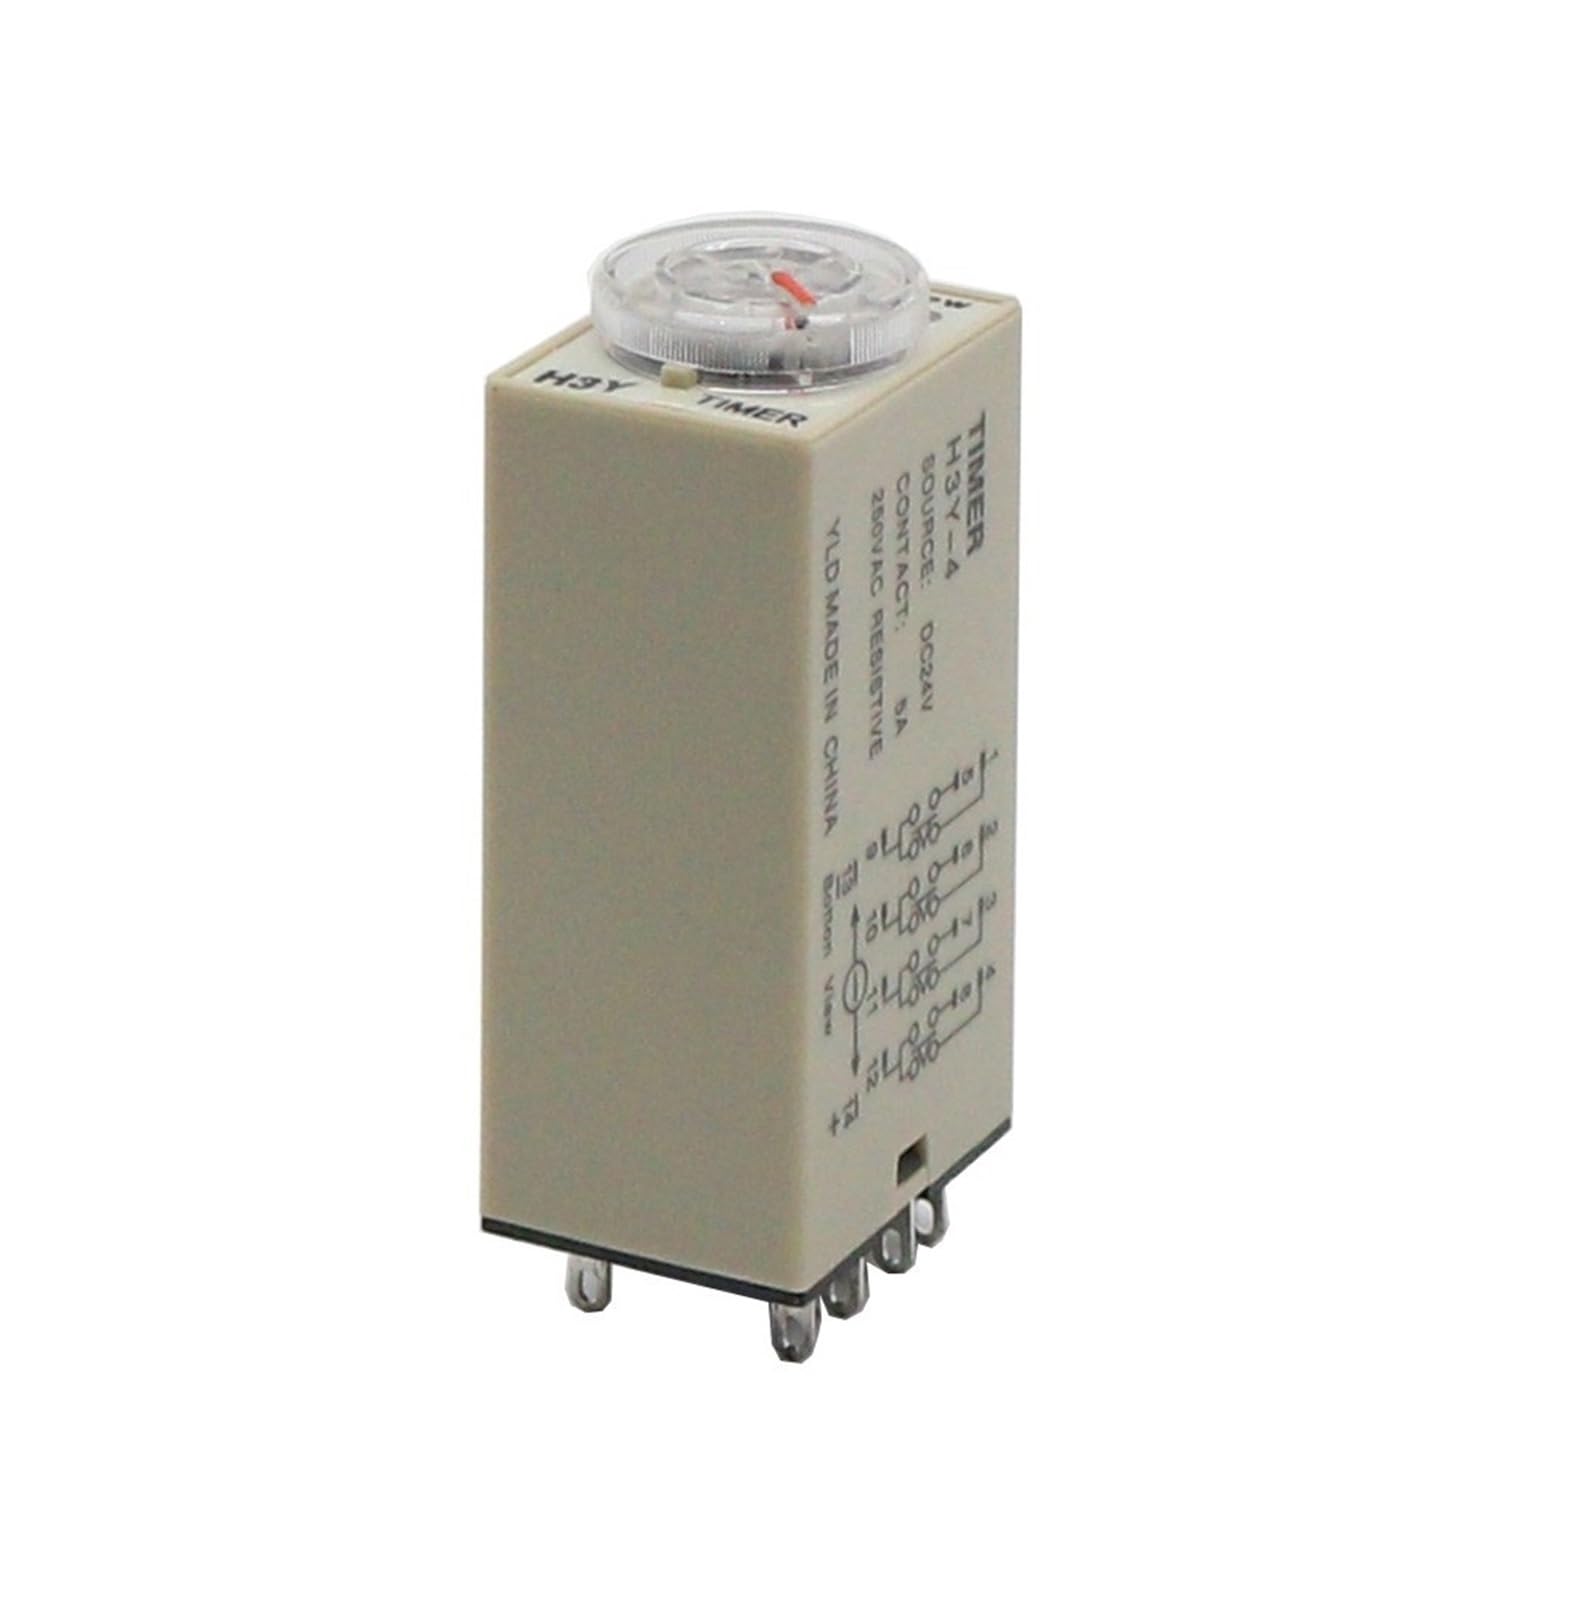 1pcs Power on Delay Time Relay H3Y-4 Small 14-pinDC12V24vAC220v Timer Switch 1S 3S 5S 30S 60S 5M 10M 30M 60M LABDIP(DC 12V,H3Y-4 3Minute) von LABDIP